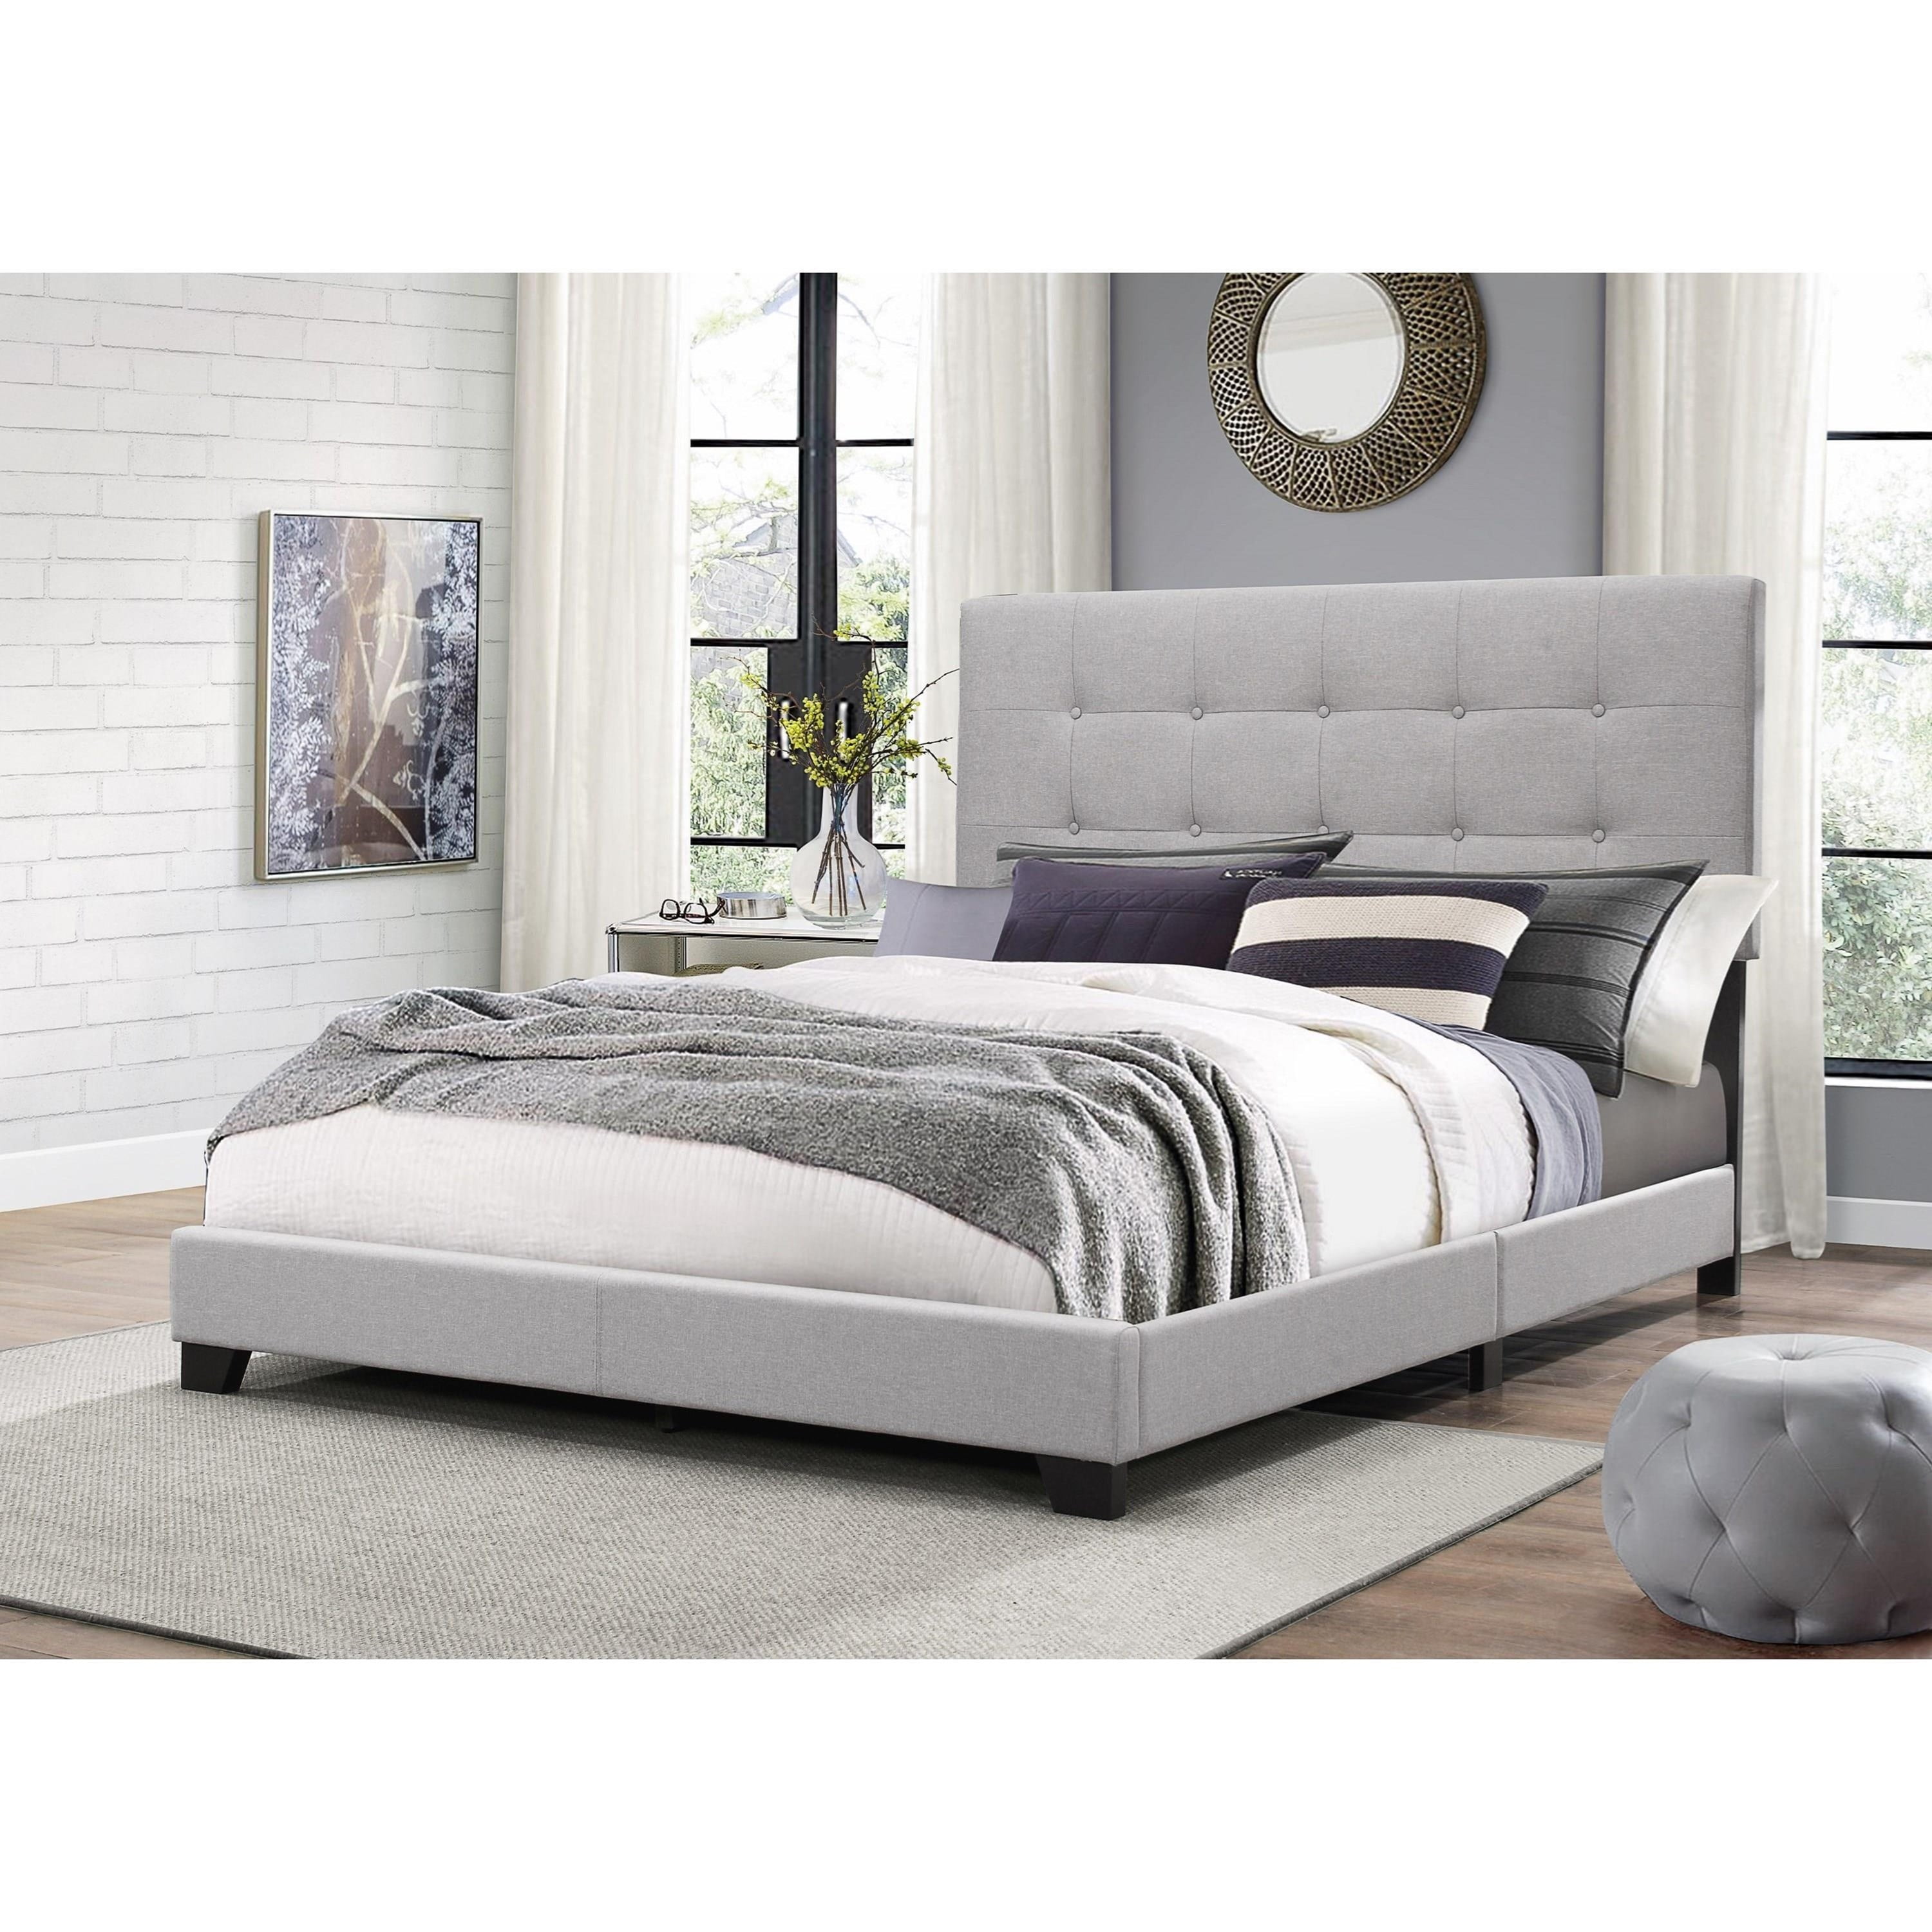 Transitional 1pc Fabric Upholstered, White Bedroom Furniture King Size Bed Frame